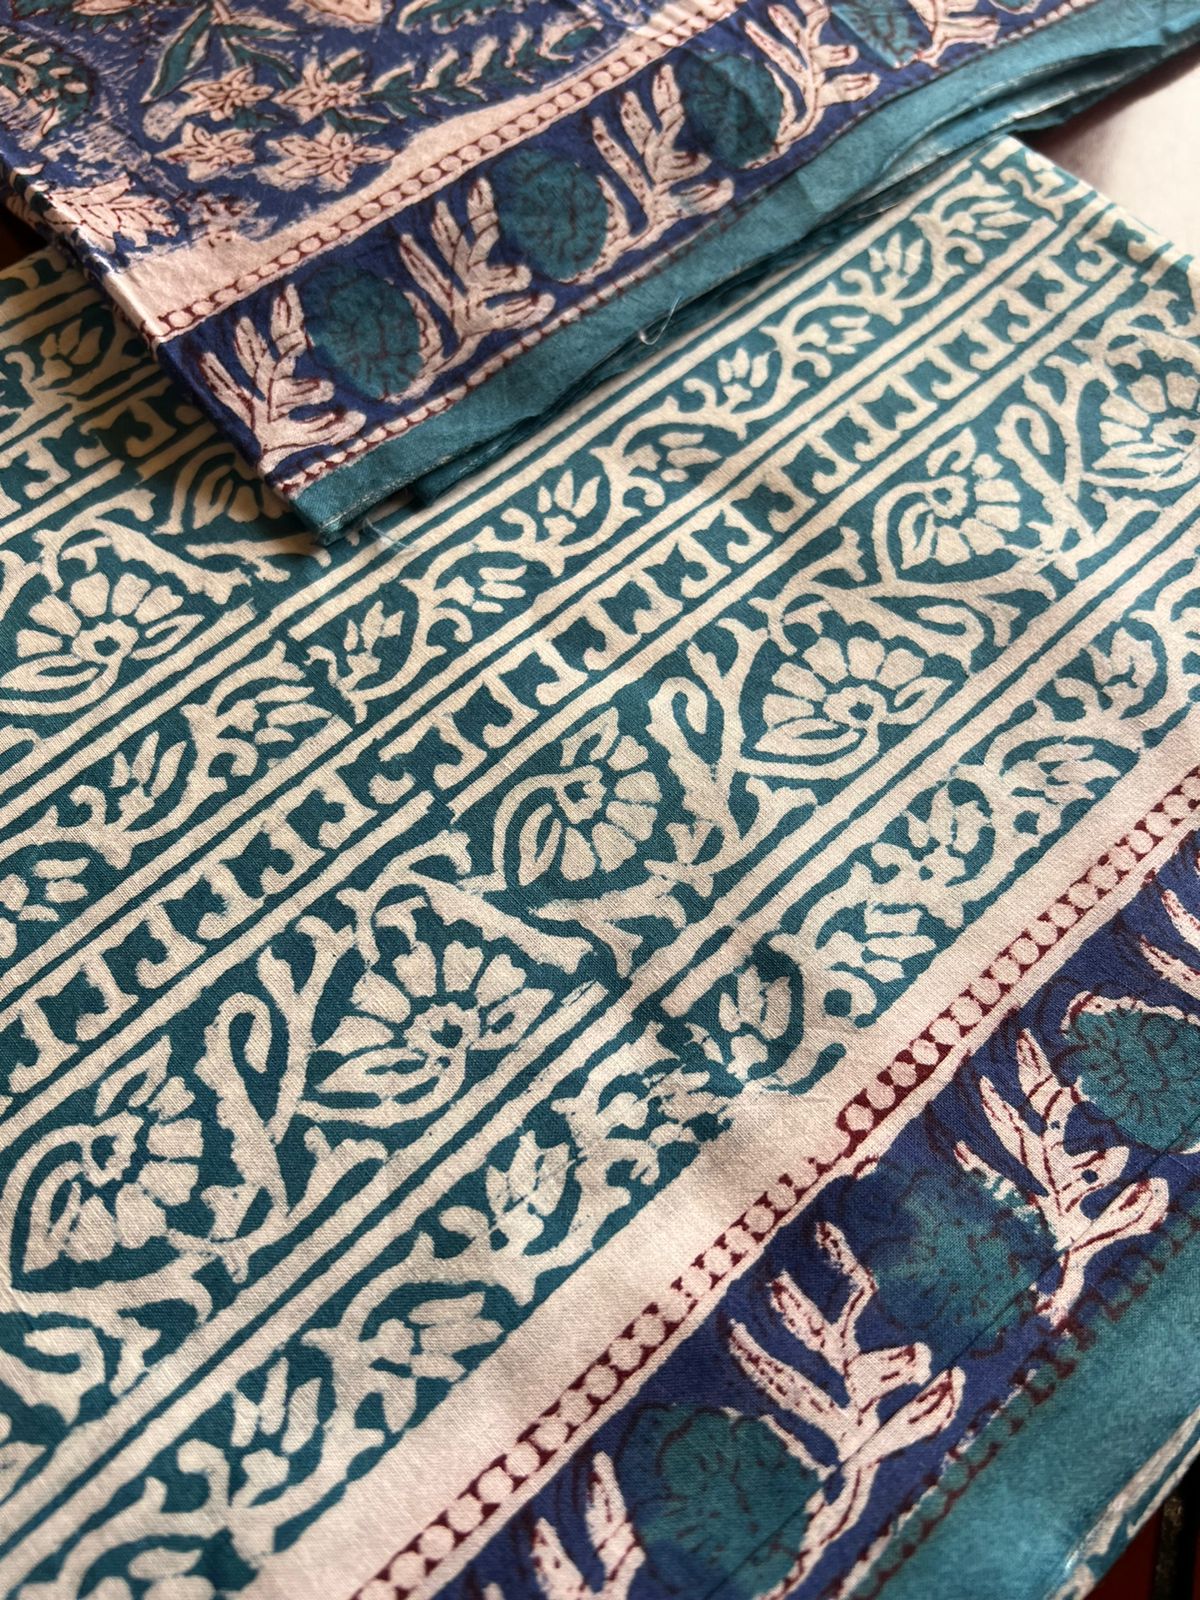 Southloom Hand Block Printed Soft Cotton Jaipur Salwar Suit Material in Blue Base Colour